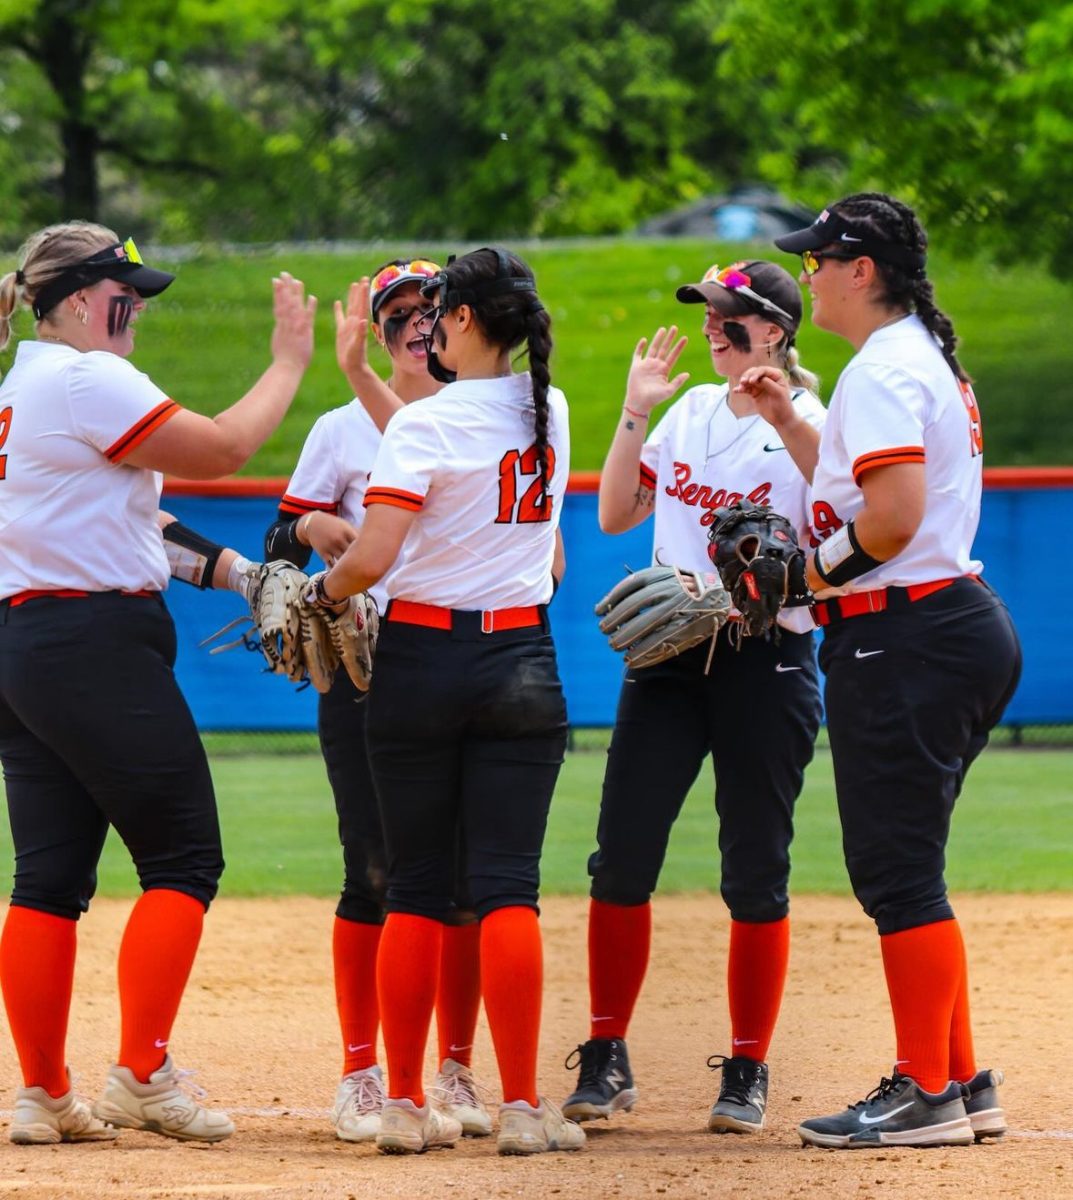 Buffalo State softball wins two elimination games to continue their journey to the Championship game